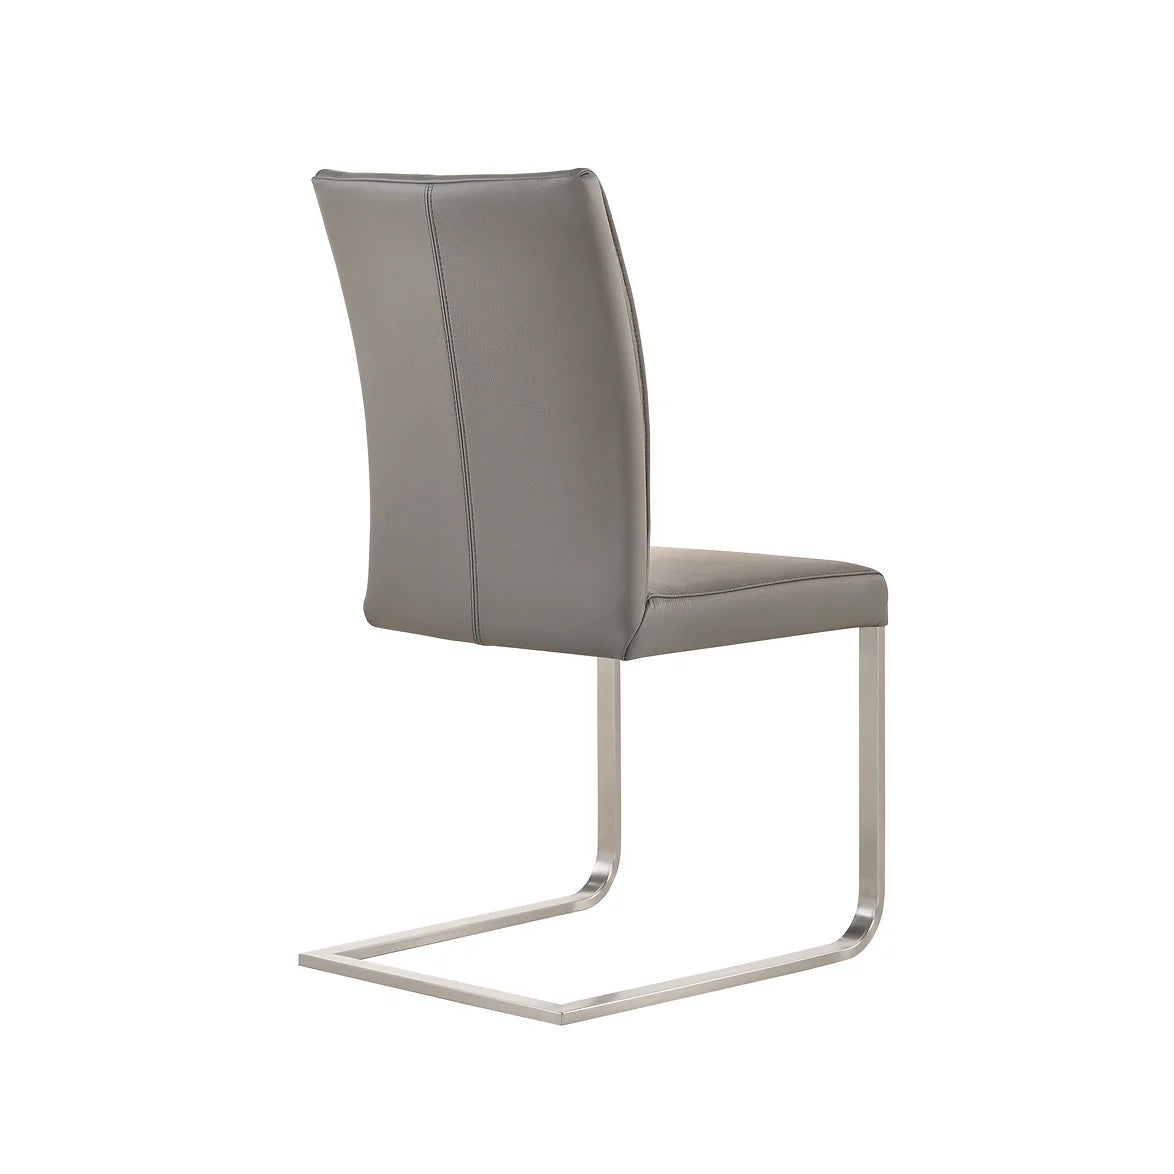 Alexi Dining Chair back